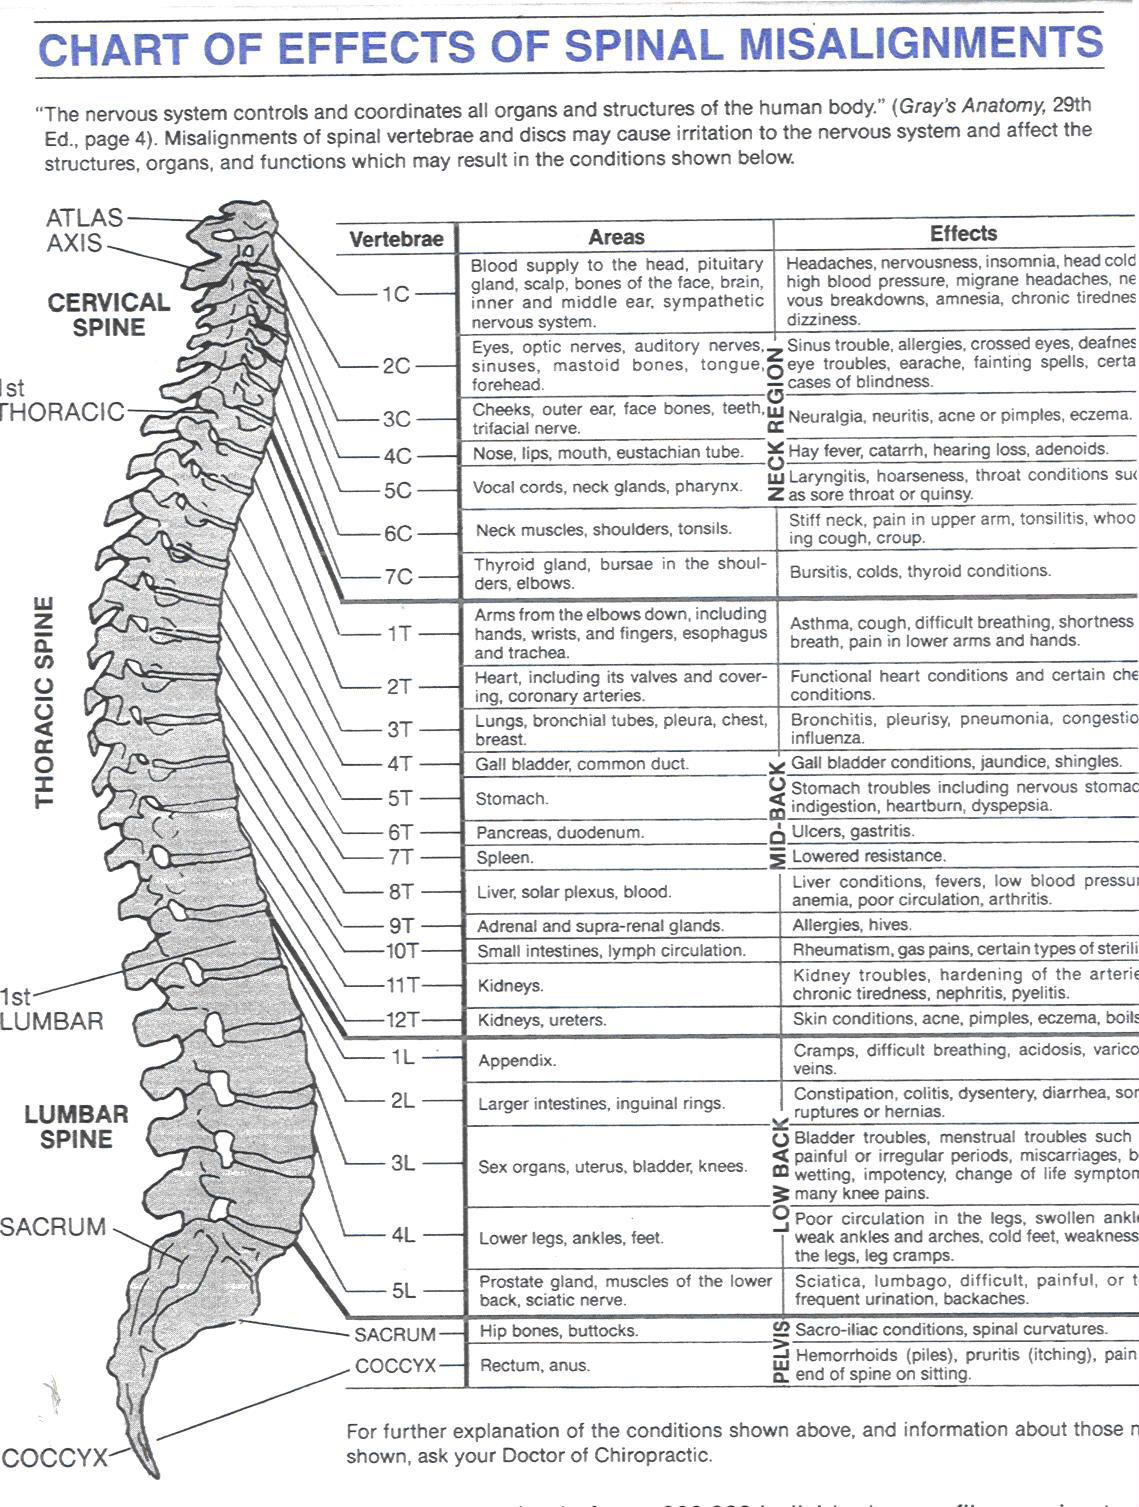 Spinal Misalignments Chart